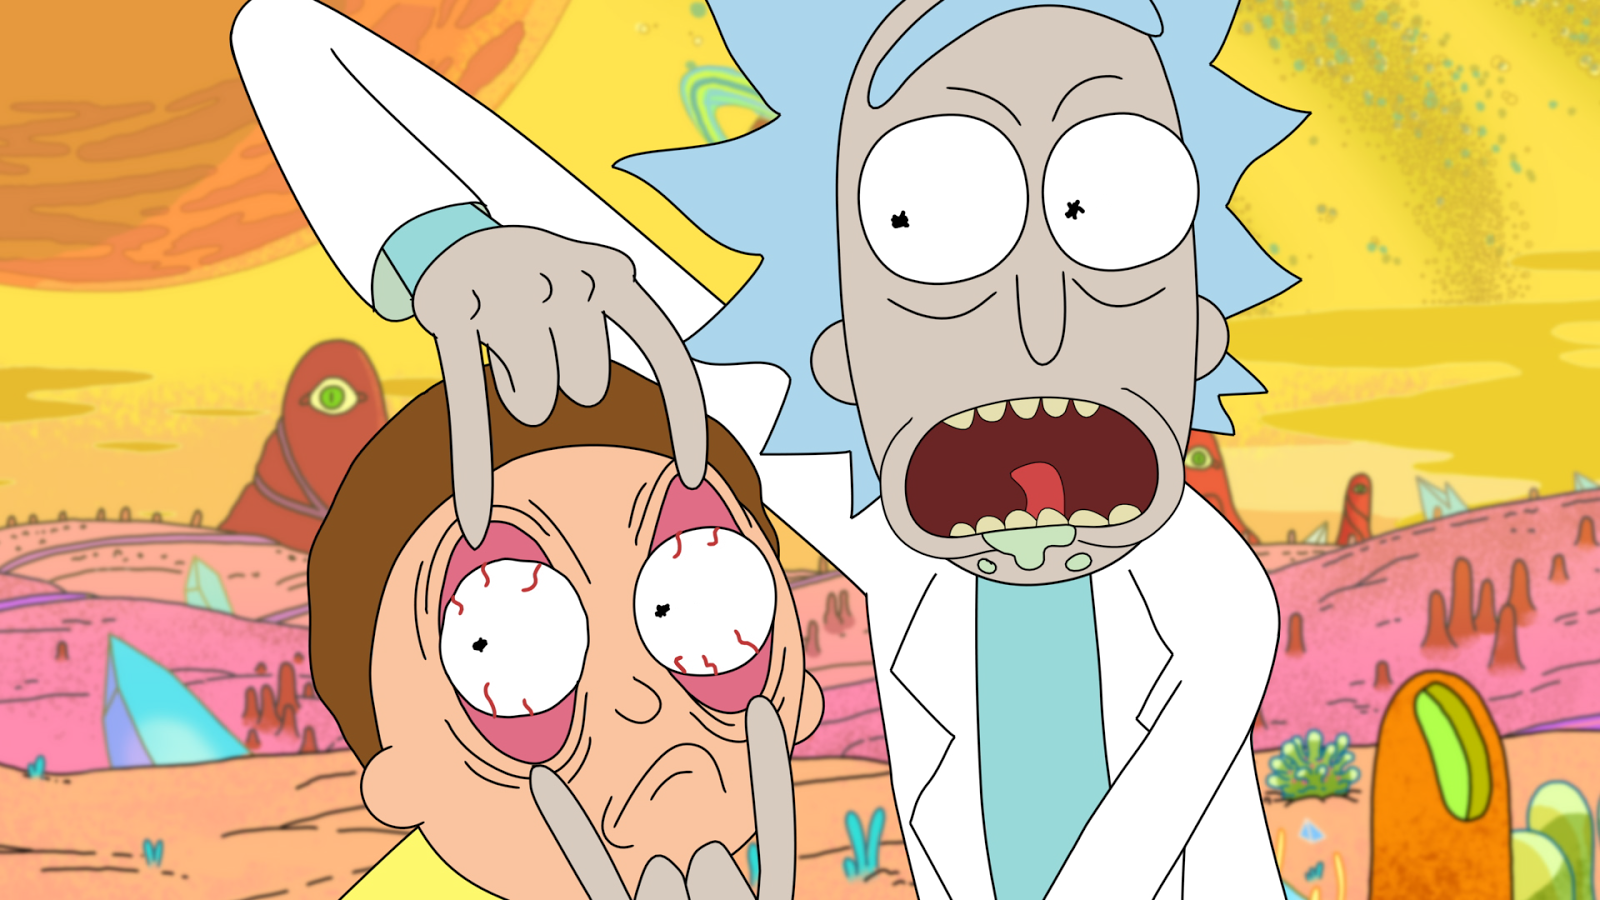 1080p Rick And Morty HD Wallpaper Background For